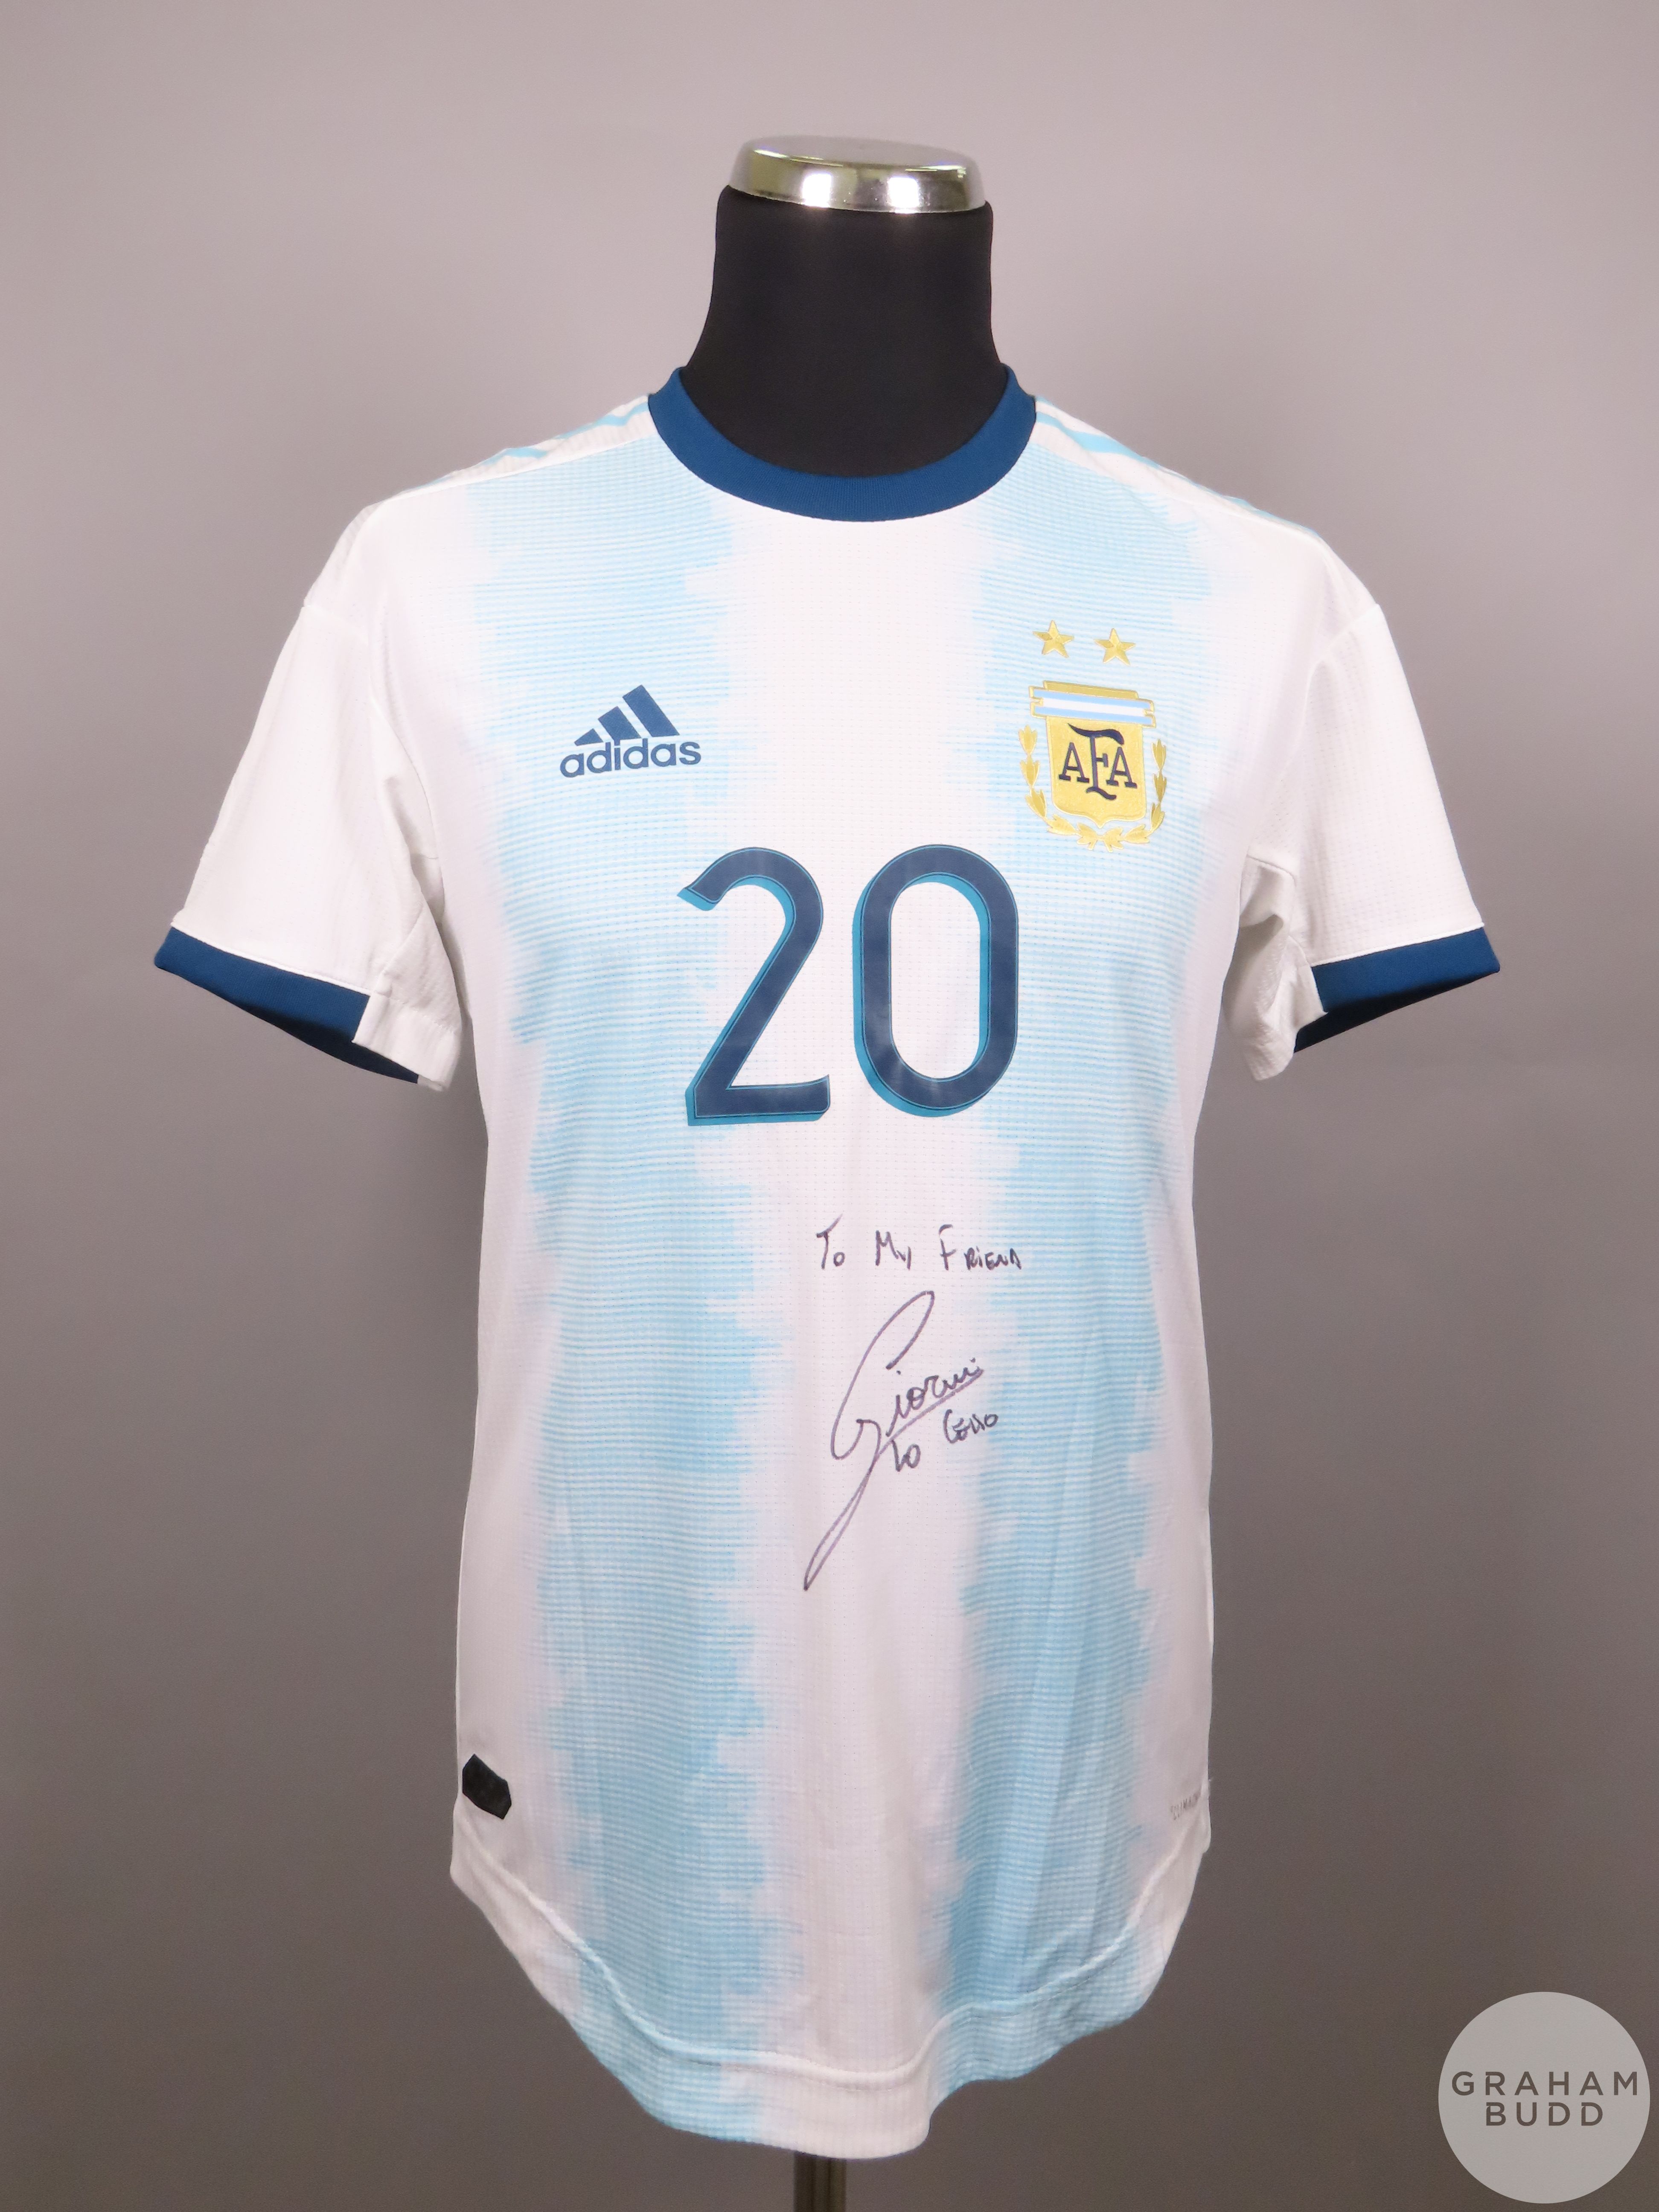 Giovanni Lo Celso blue and white No.20 Argentina player issue short sleeved shirt, 2019, Adidas 4